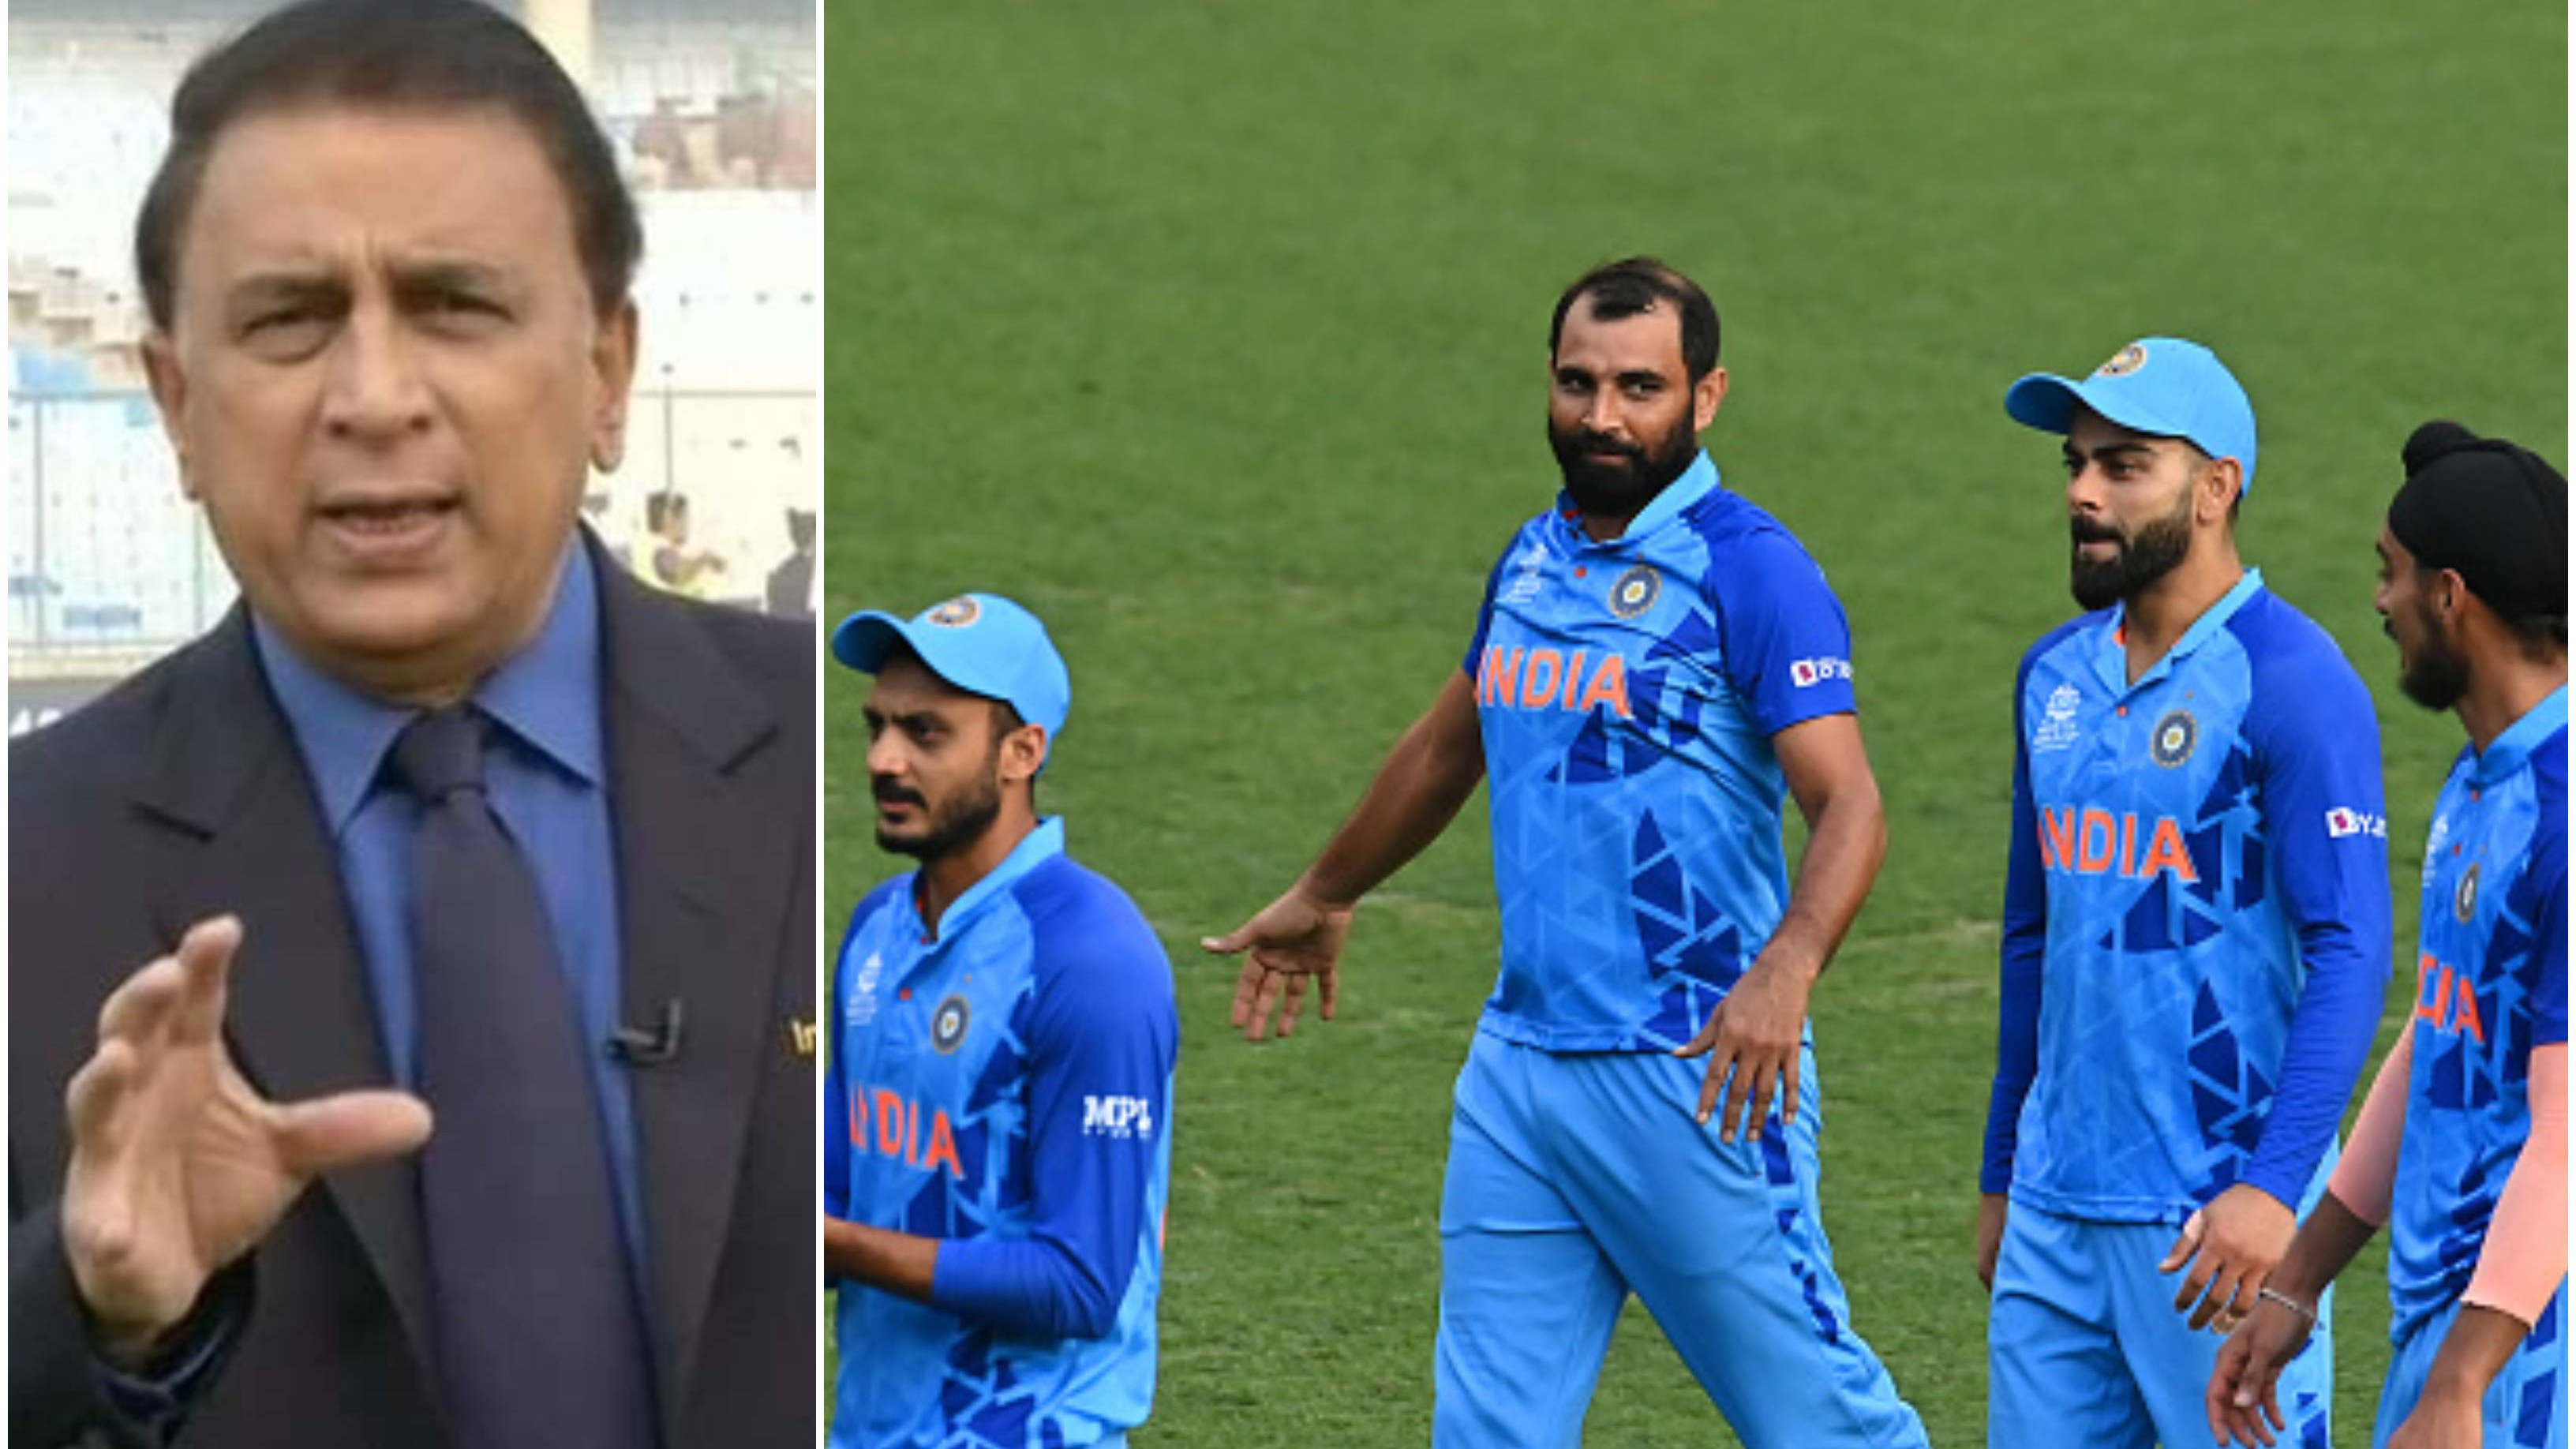 T20 World Cup 2022: “If Indian team doesn’t win, it won’t be for lack of preparation,” says Sunil Gavaskar